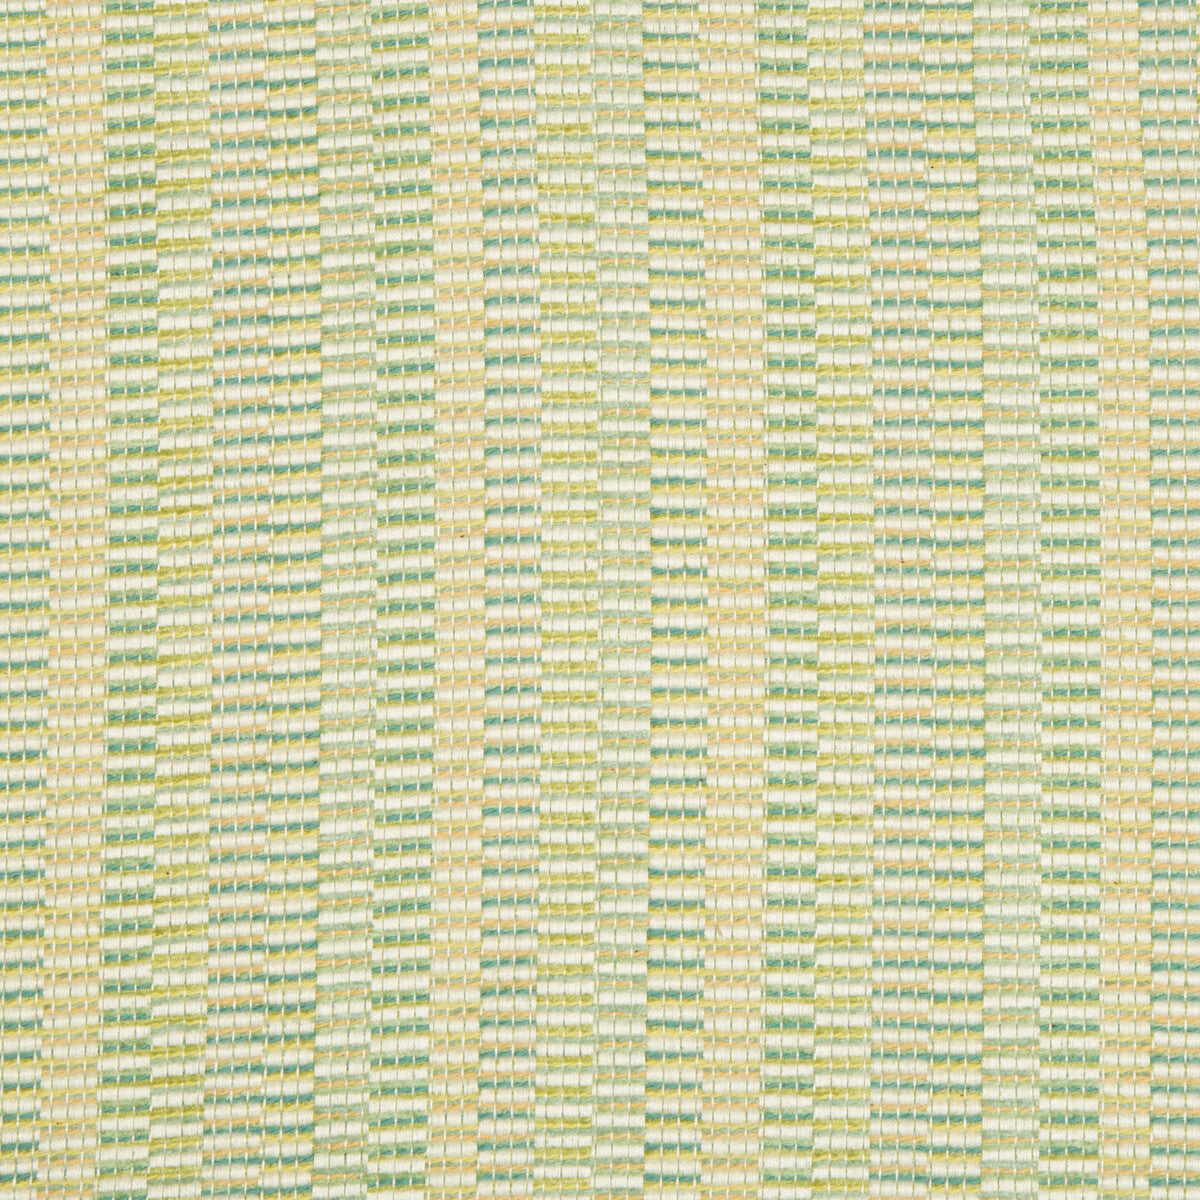 Kravet Contract fabric in 34732-23 color - pattern 34732.23.0 - by Kravet Contract in the Crypton Incase collection